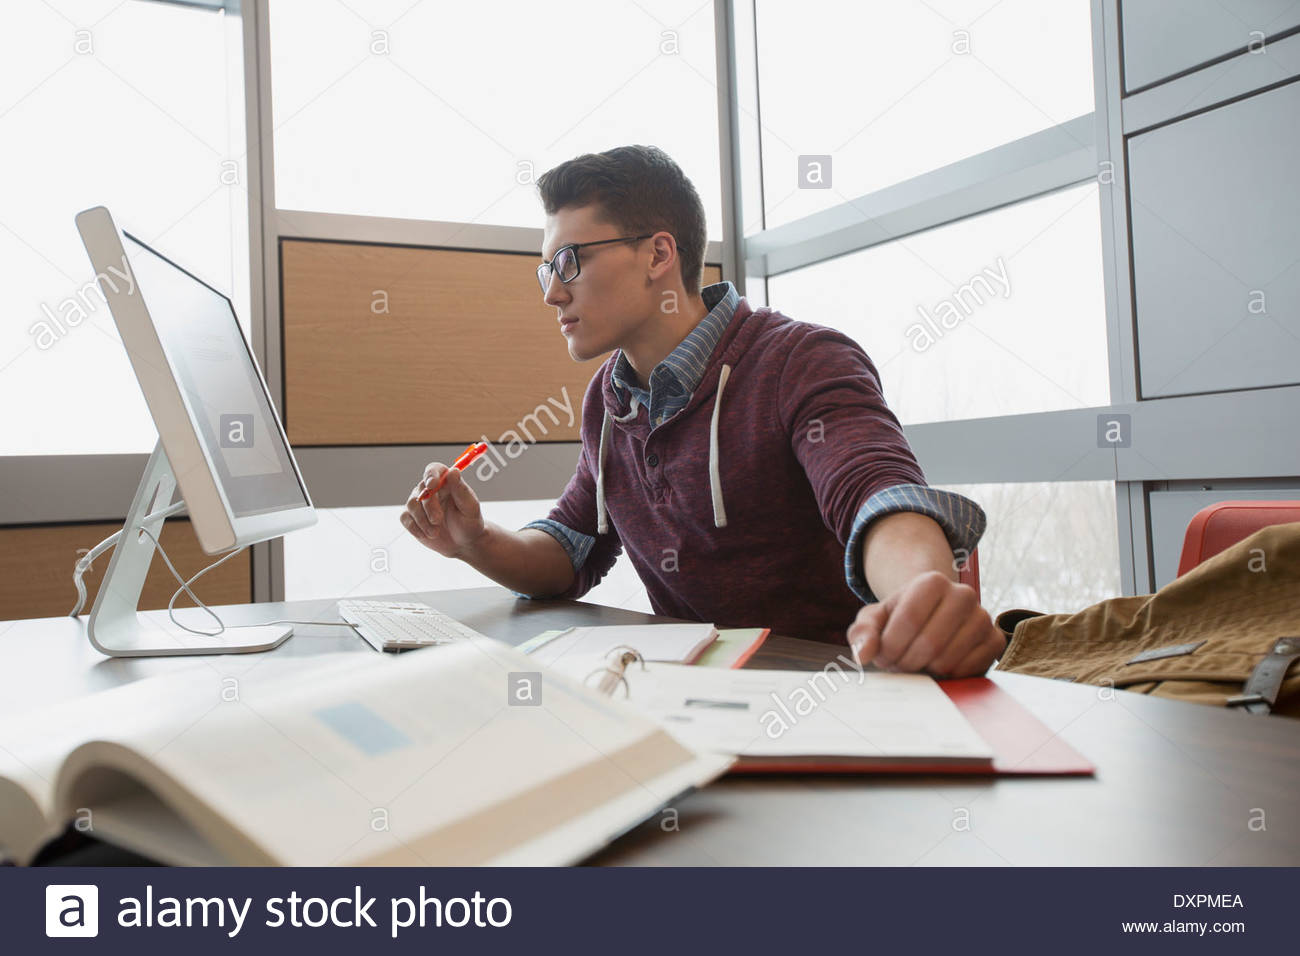 College student studying at computer Stock Photo